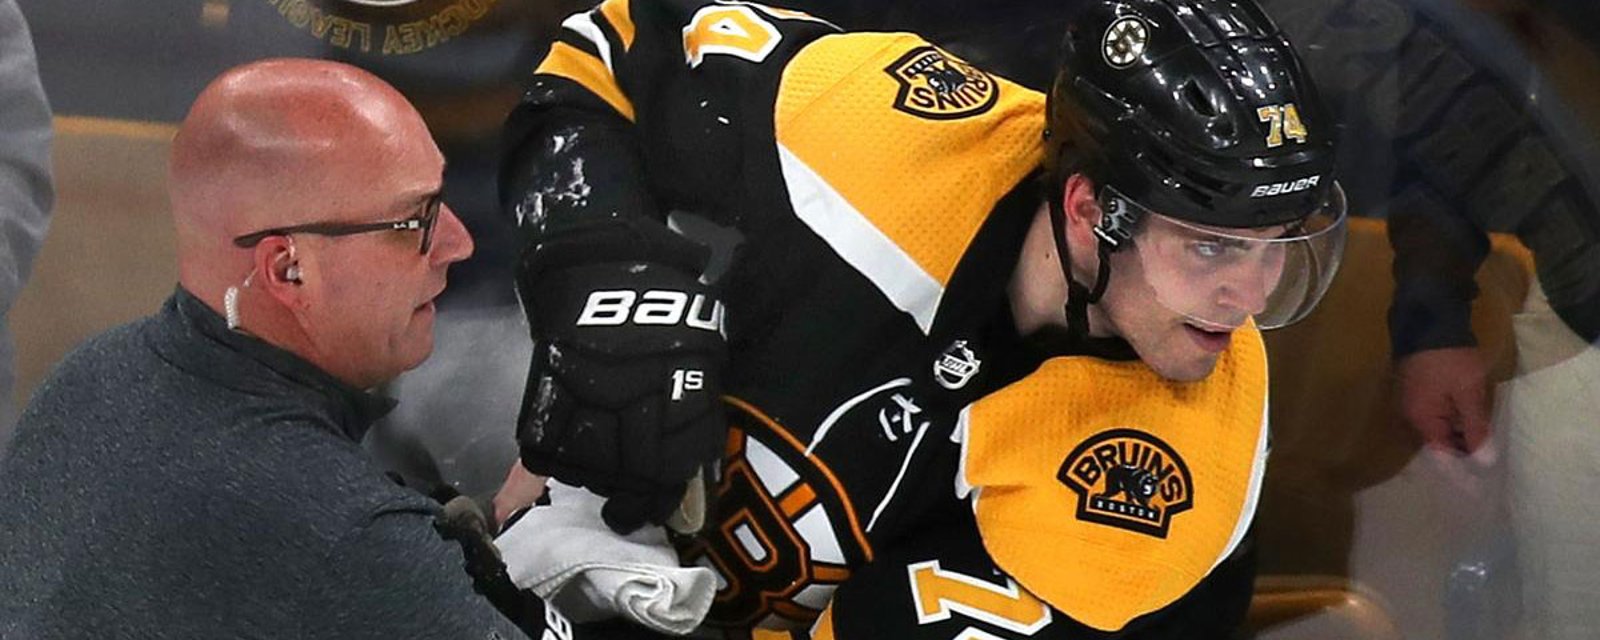 DeBrusk receives death threats since Game 1 of Bruins-Leafs series 